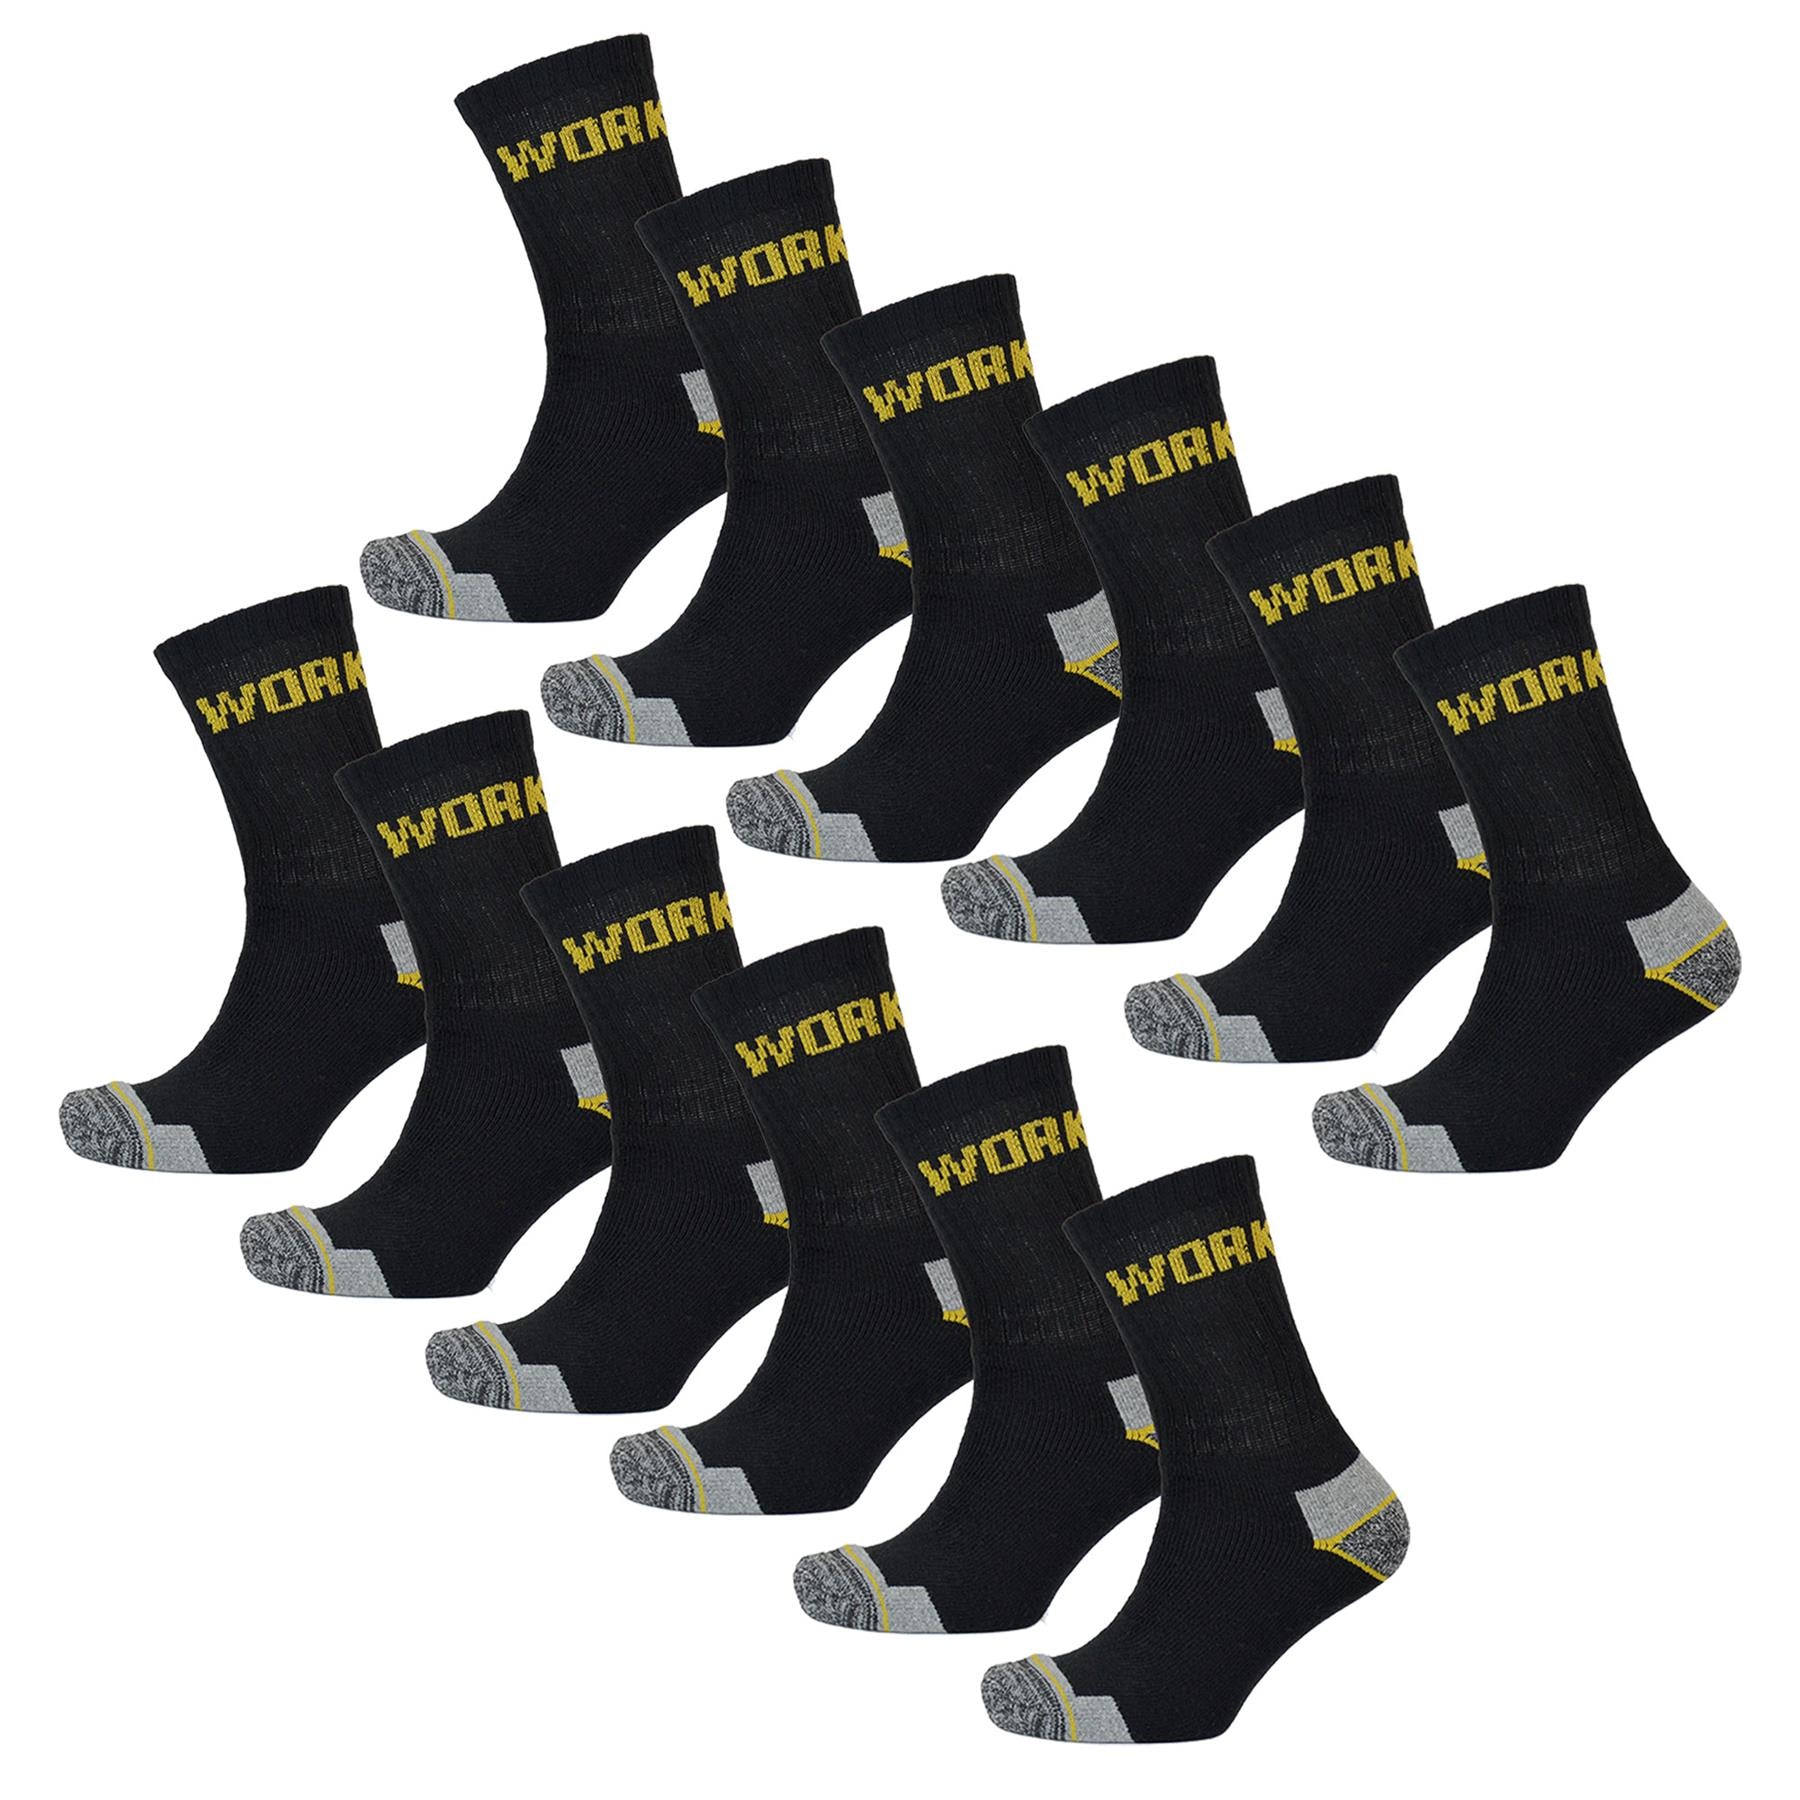 A2Z Mens Workwear Cotton Blend Comfortable 3, 6 or 12 Pack Outdoor Boot Socks